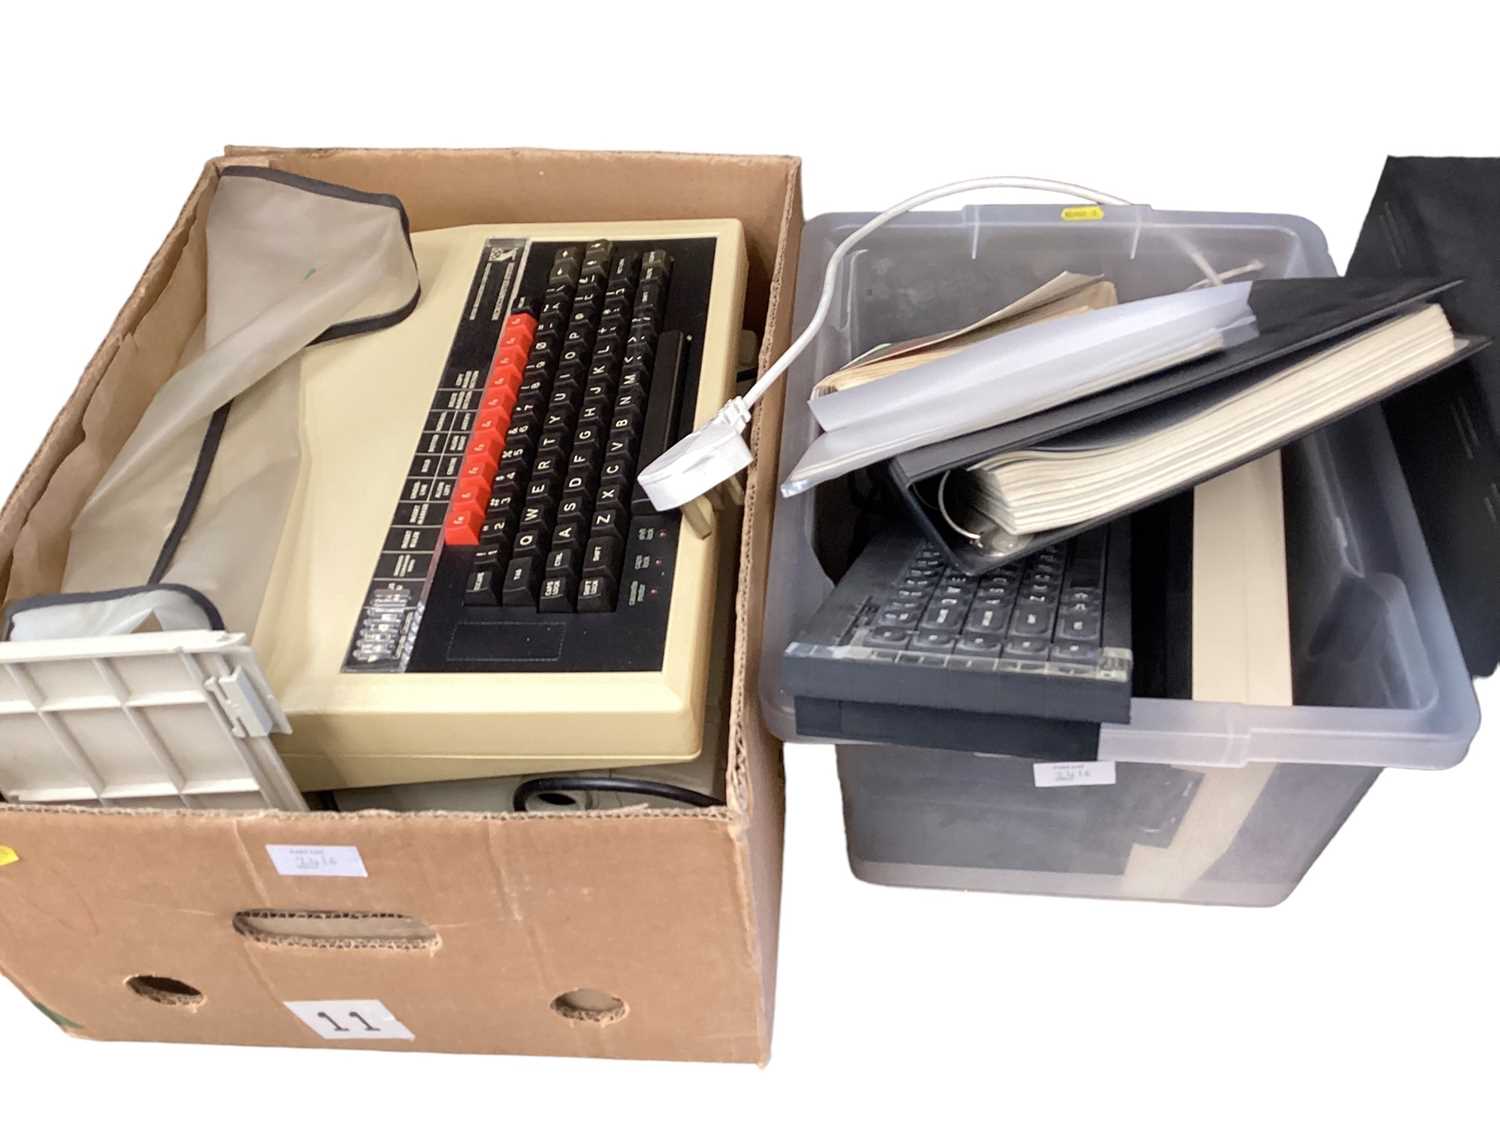 Lot 2416 - Microvitec Cub monitor, together with Acorn, Sinclair and other vintage computer equipment)